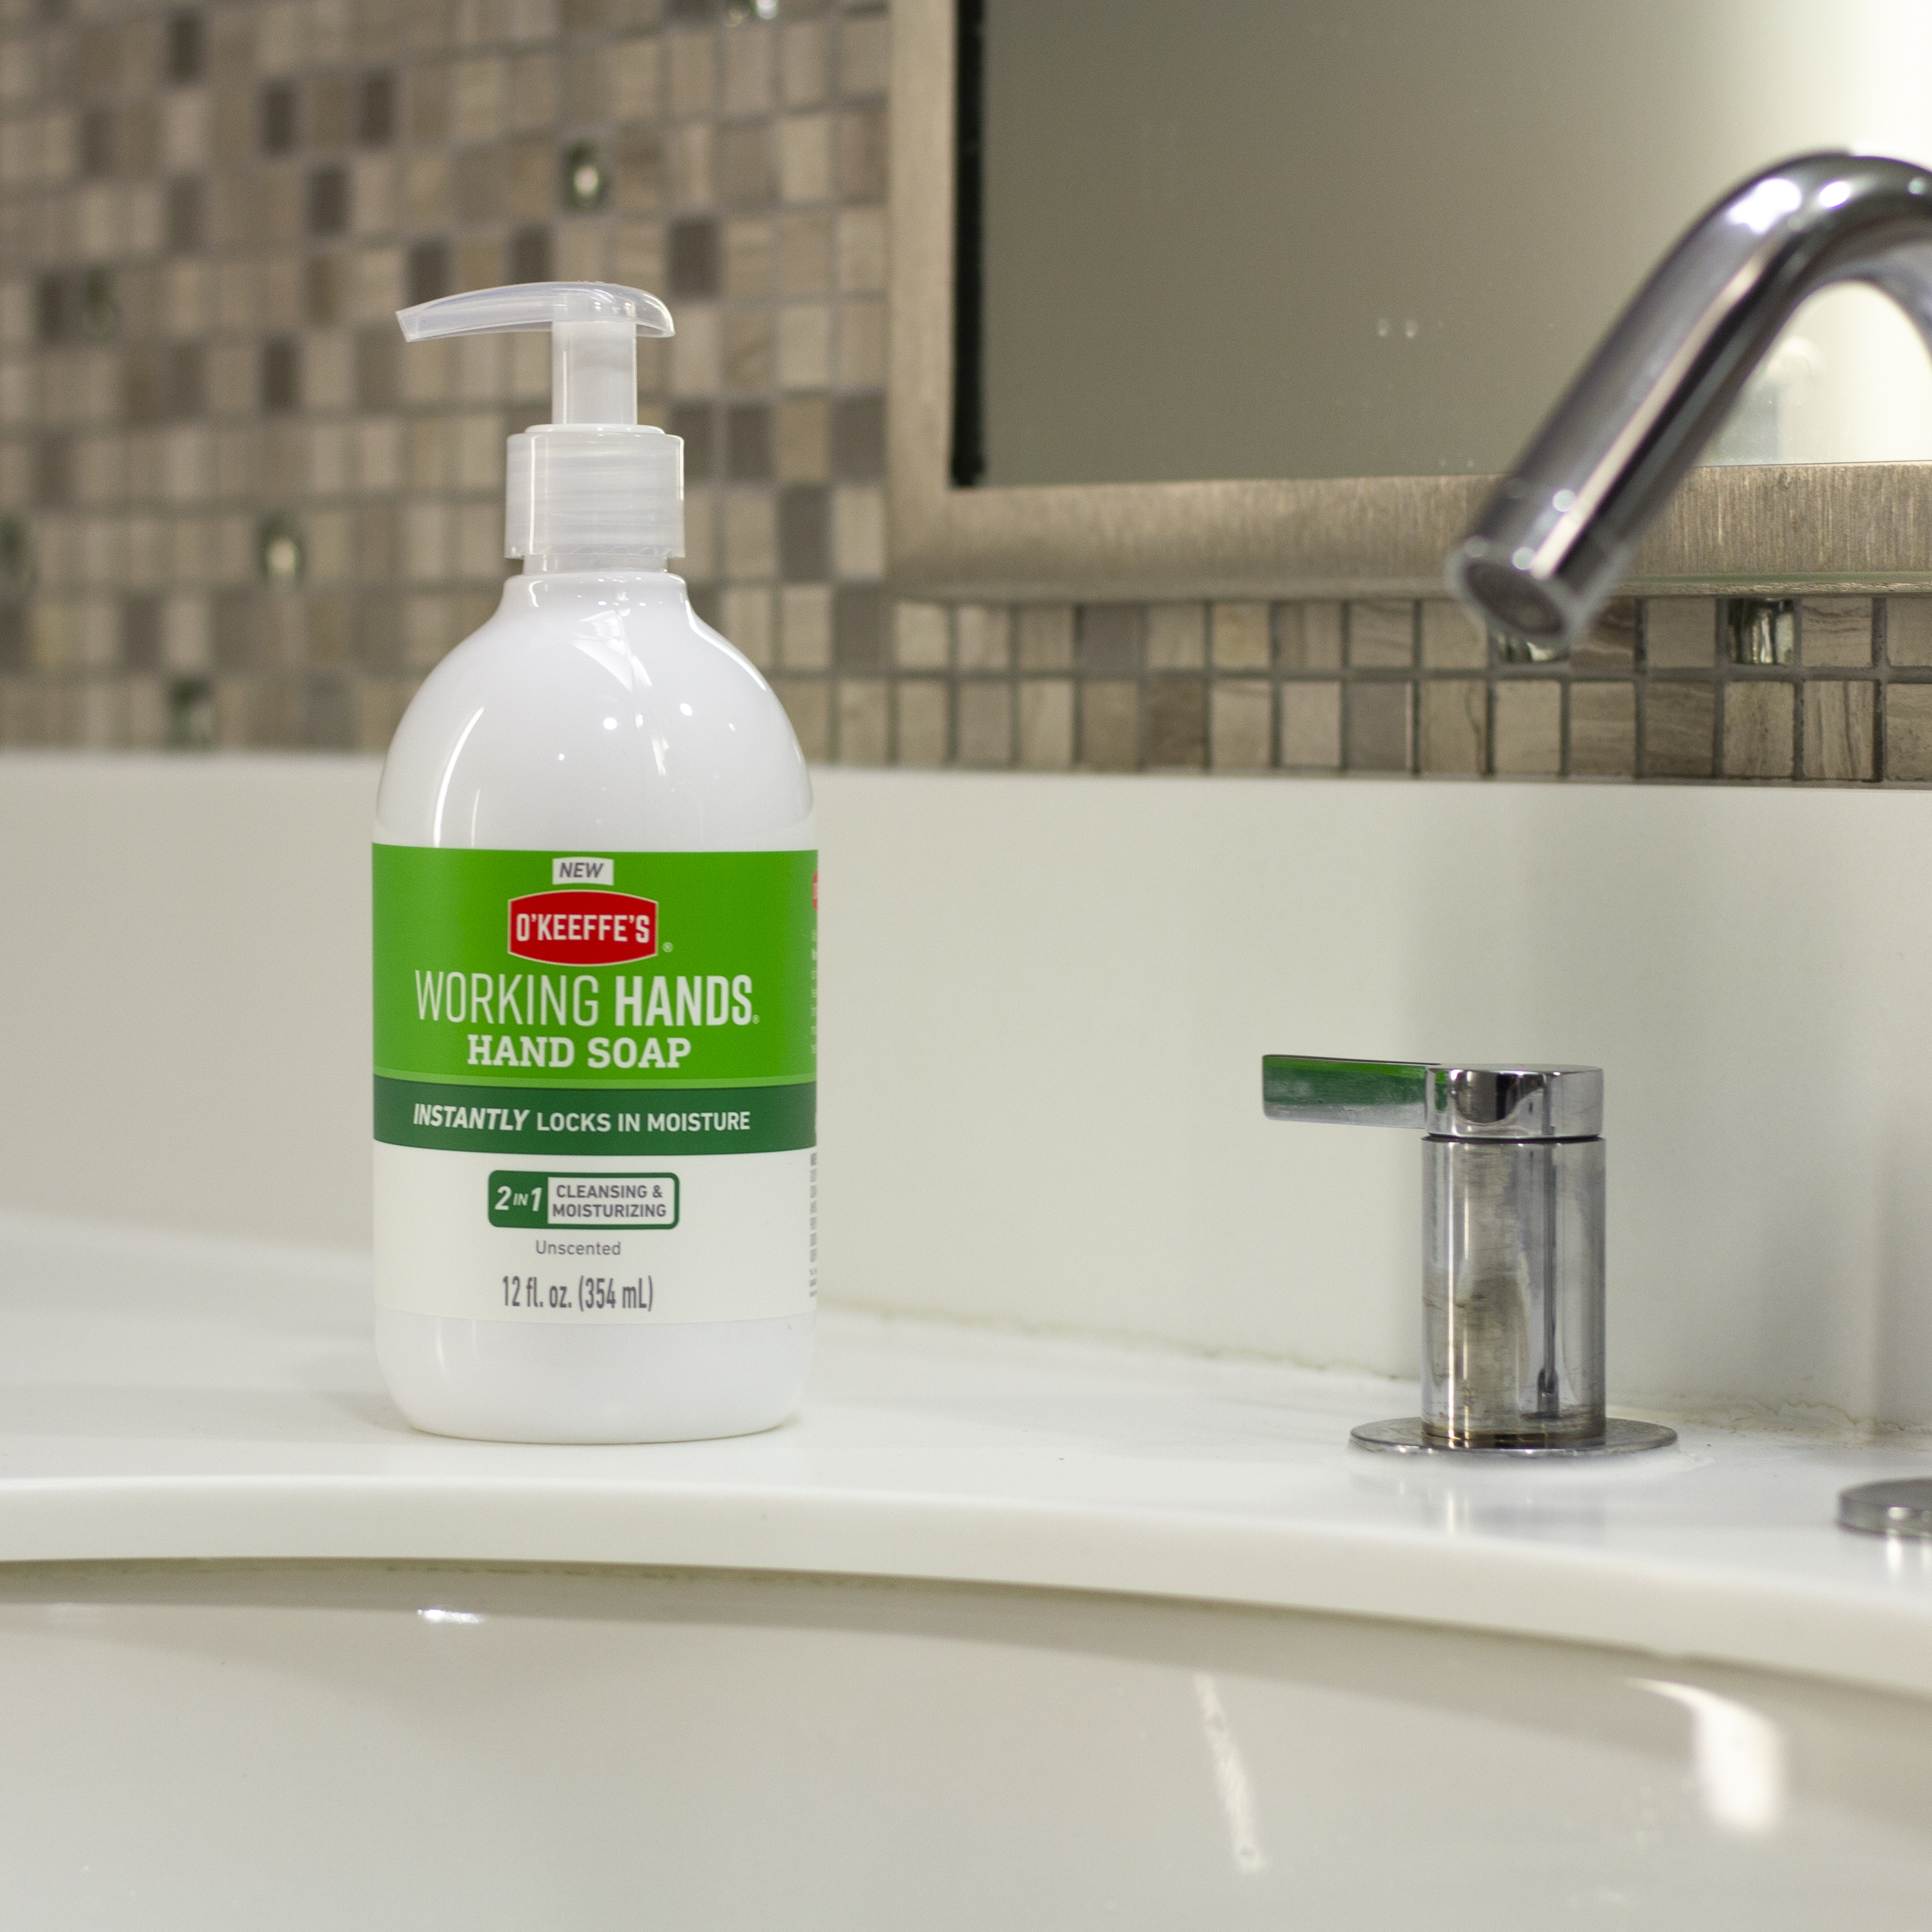 O'Keeffe's Working Hands Moisturizing Liquid Hand Soap, Unscented, 12 fl oz (354 ml) - image 3 of 13